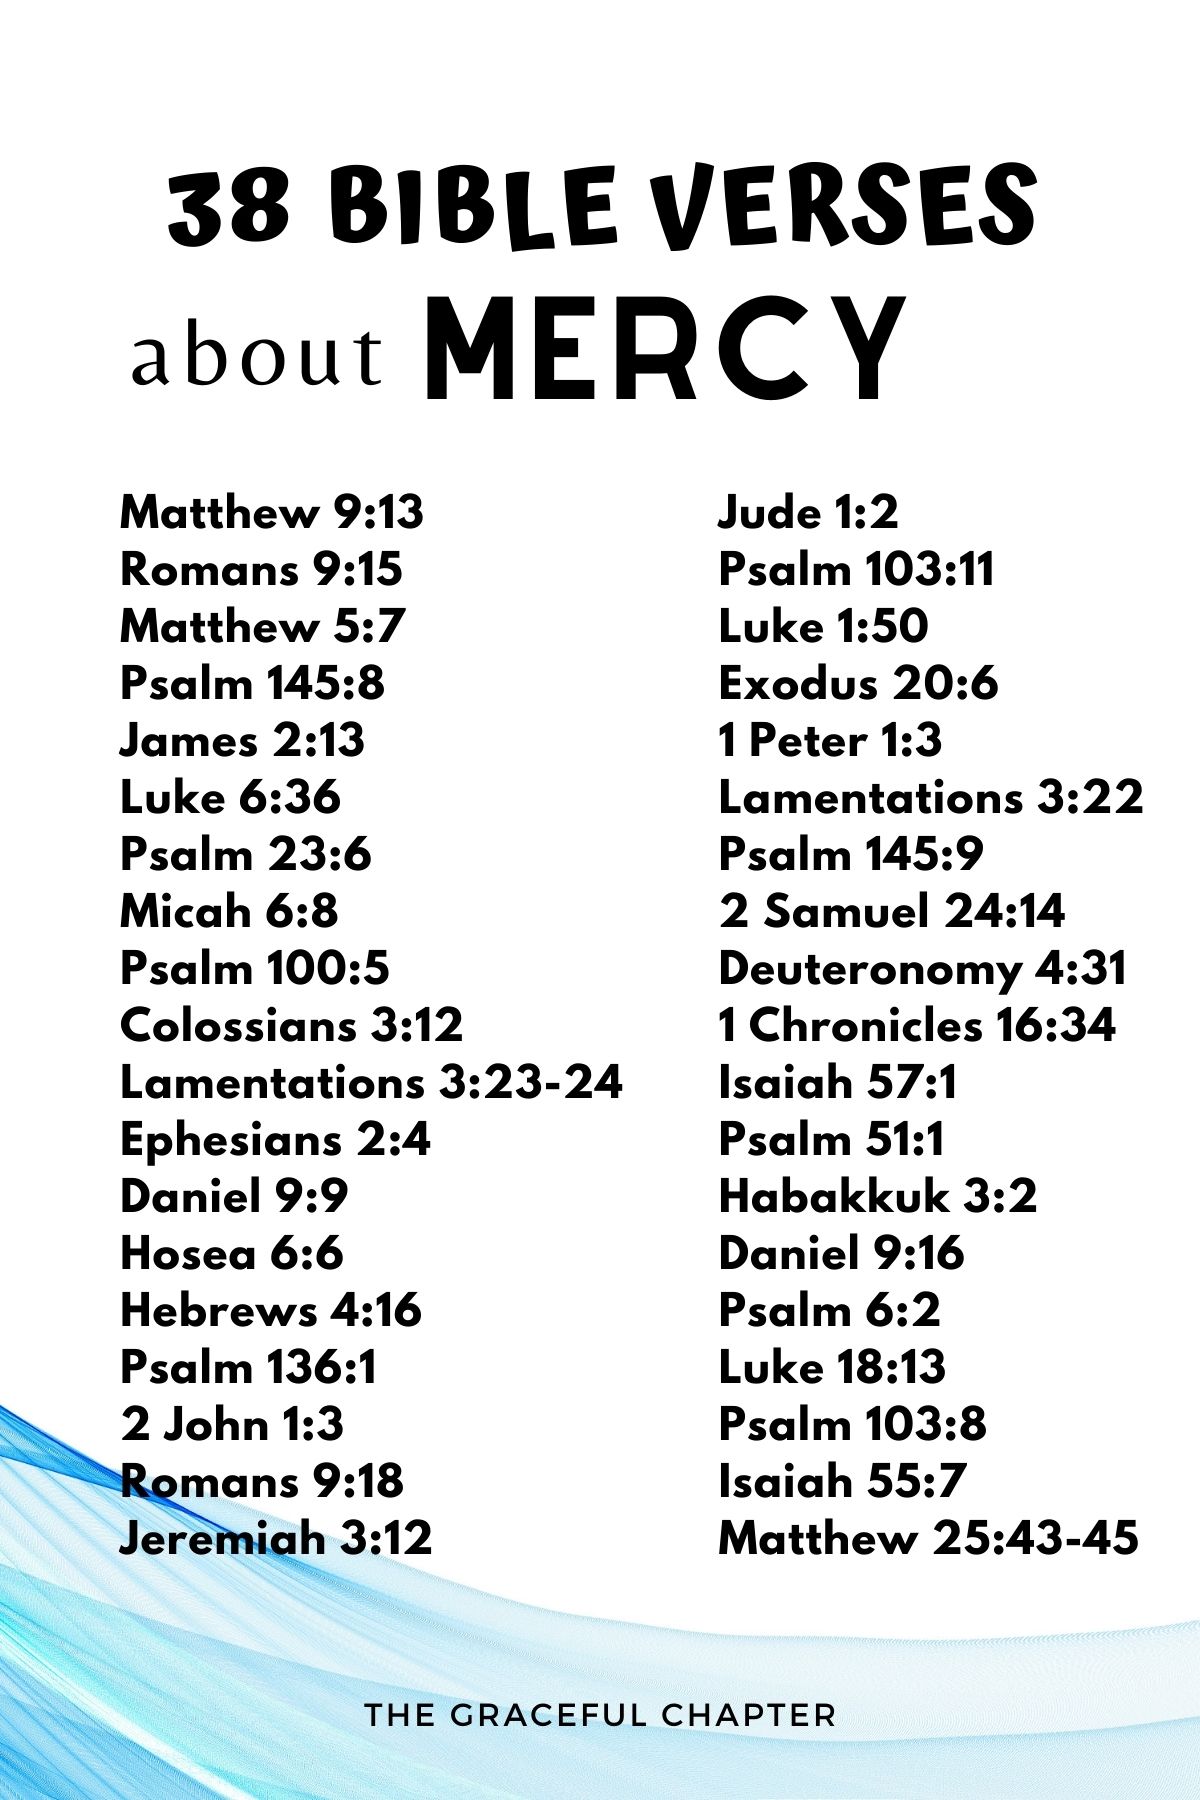 bible verses about mercy - mercy bible verses 